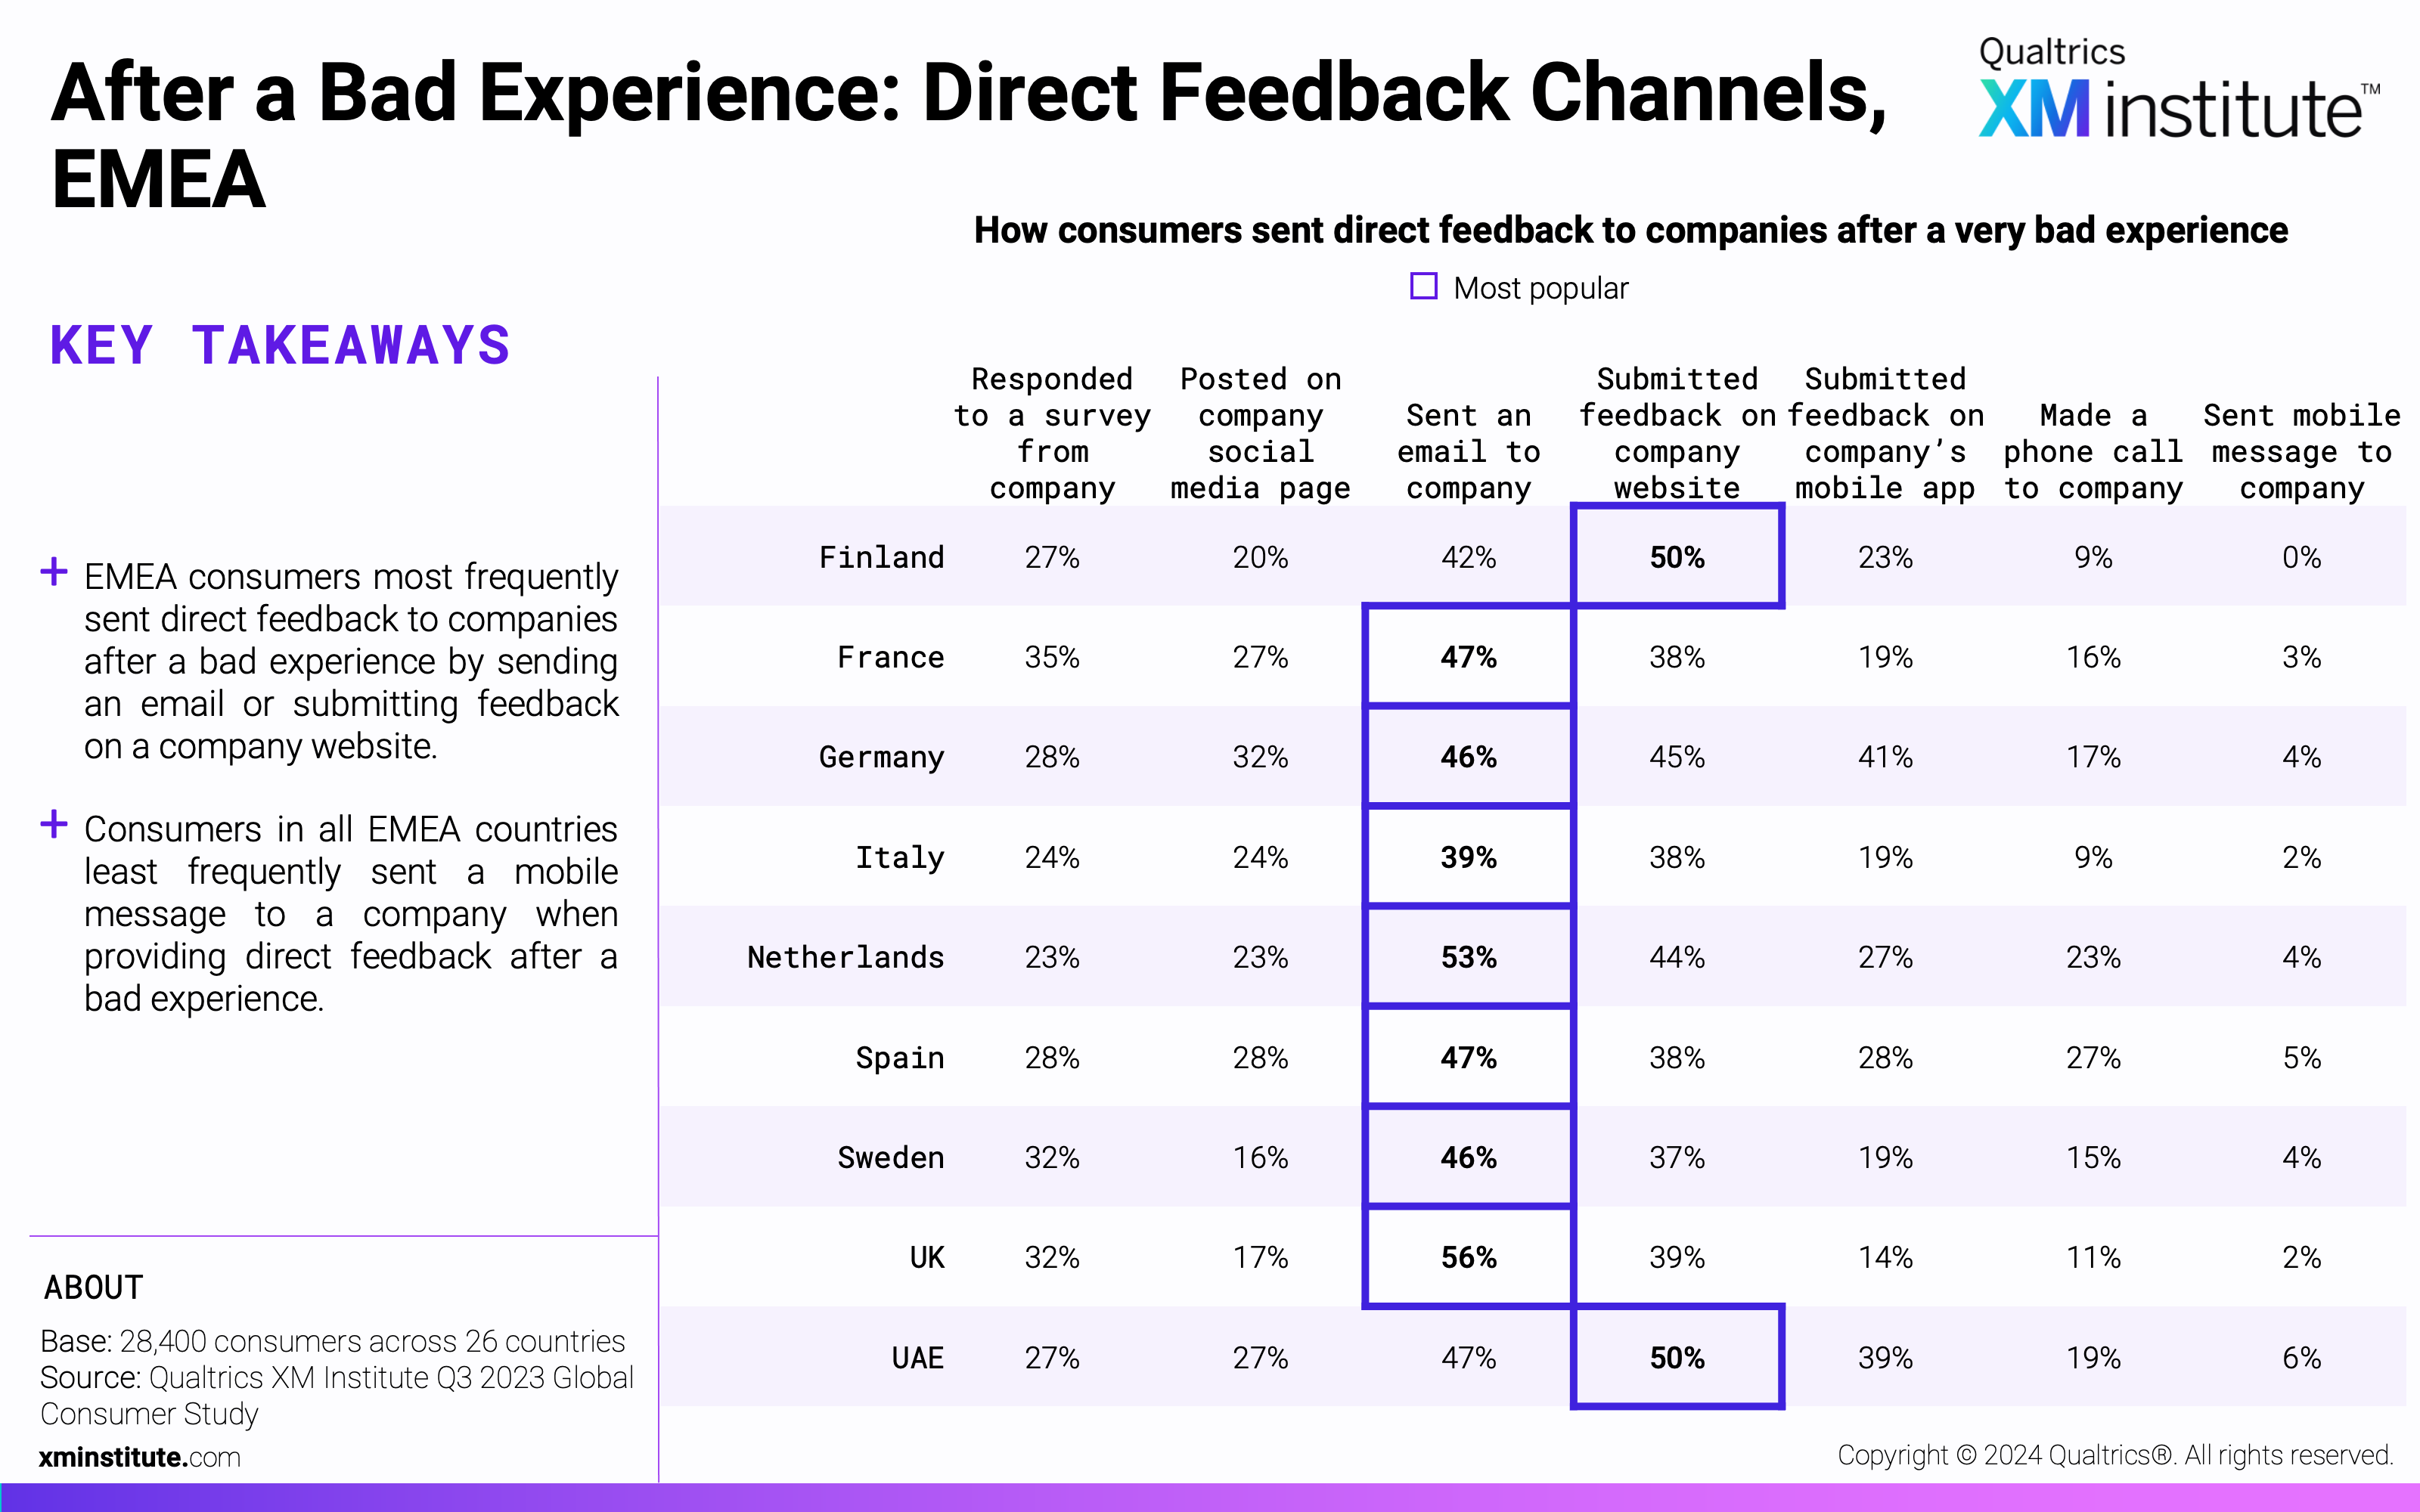 This table shows the percentage of consumers from each country that used each channel to send direct feedback to a company after a very bad experience.